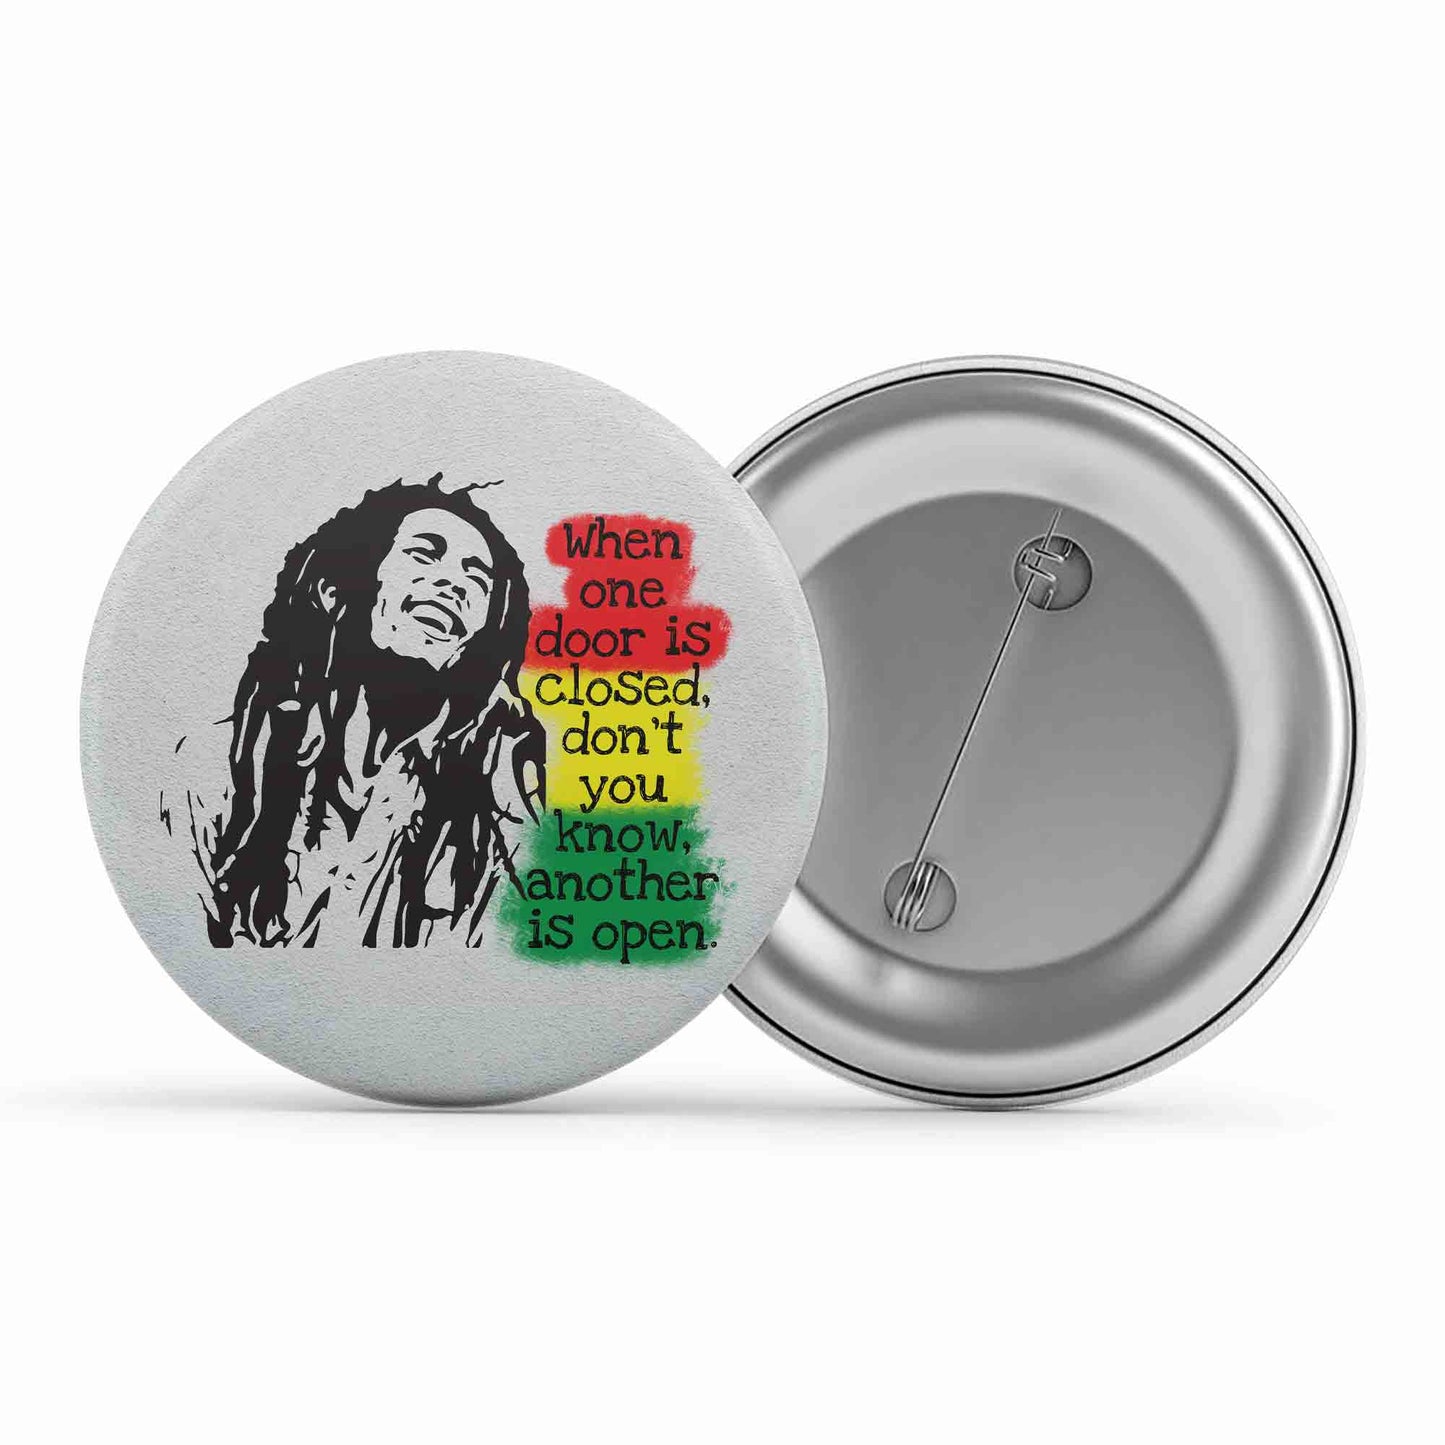 bob marley when one door is closed badge pin button music band buy online india the banyan tee tbt men women girls boys unisex